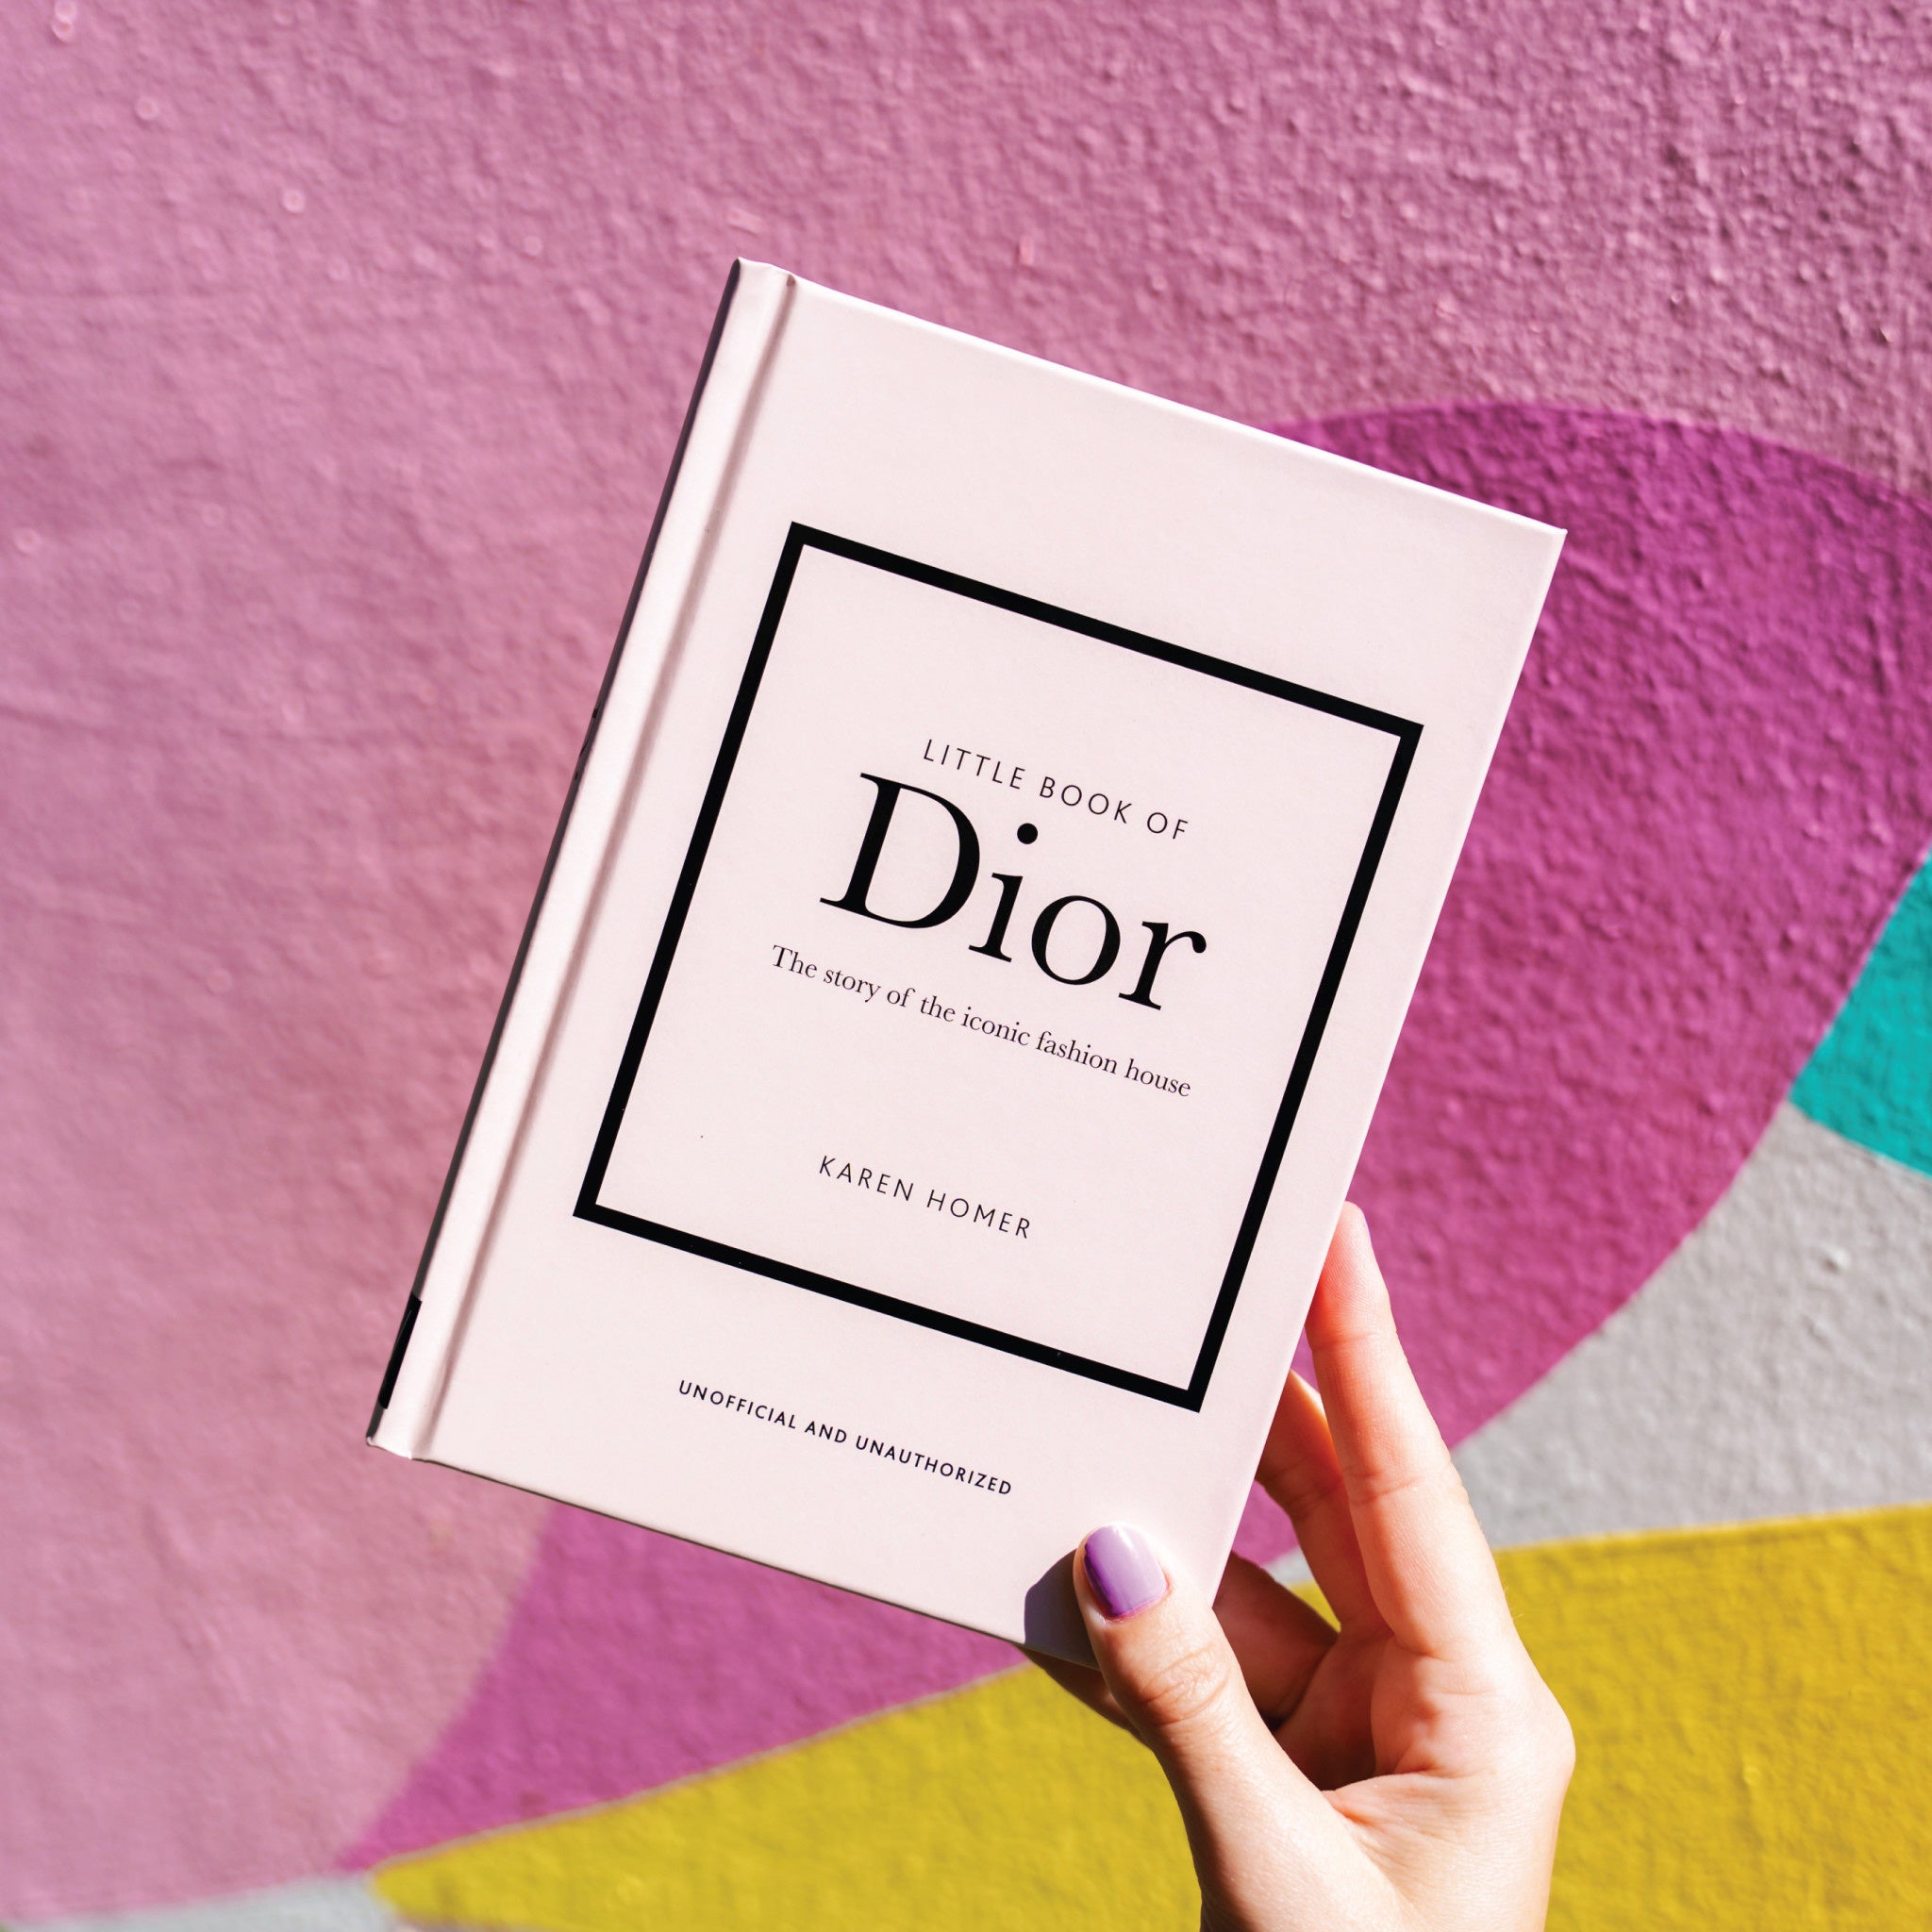 Little Book of Dior: The Story of the Iconic Fashion House - Wynwood Walls Shop